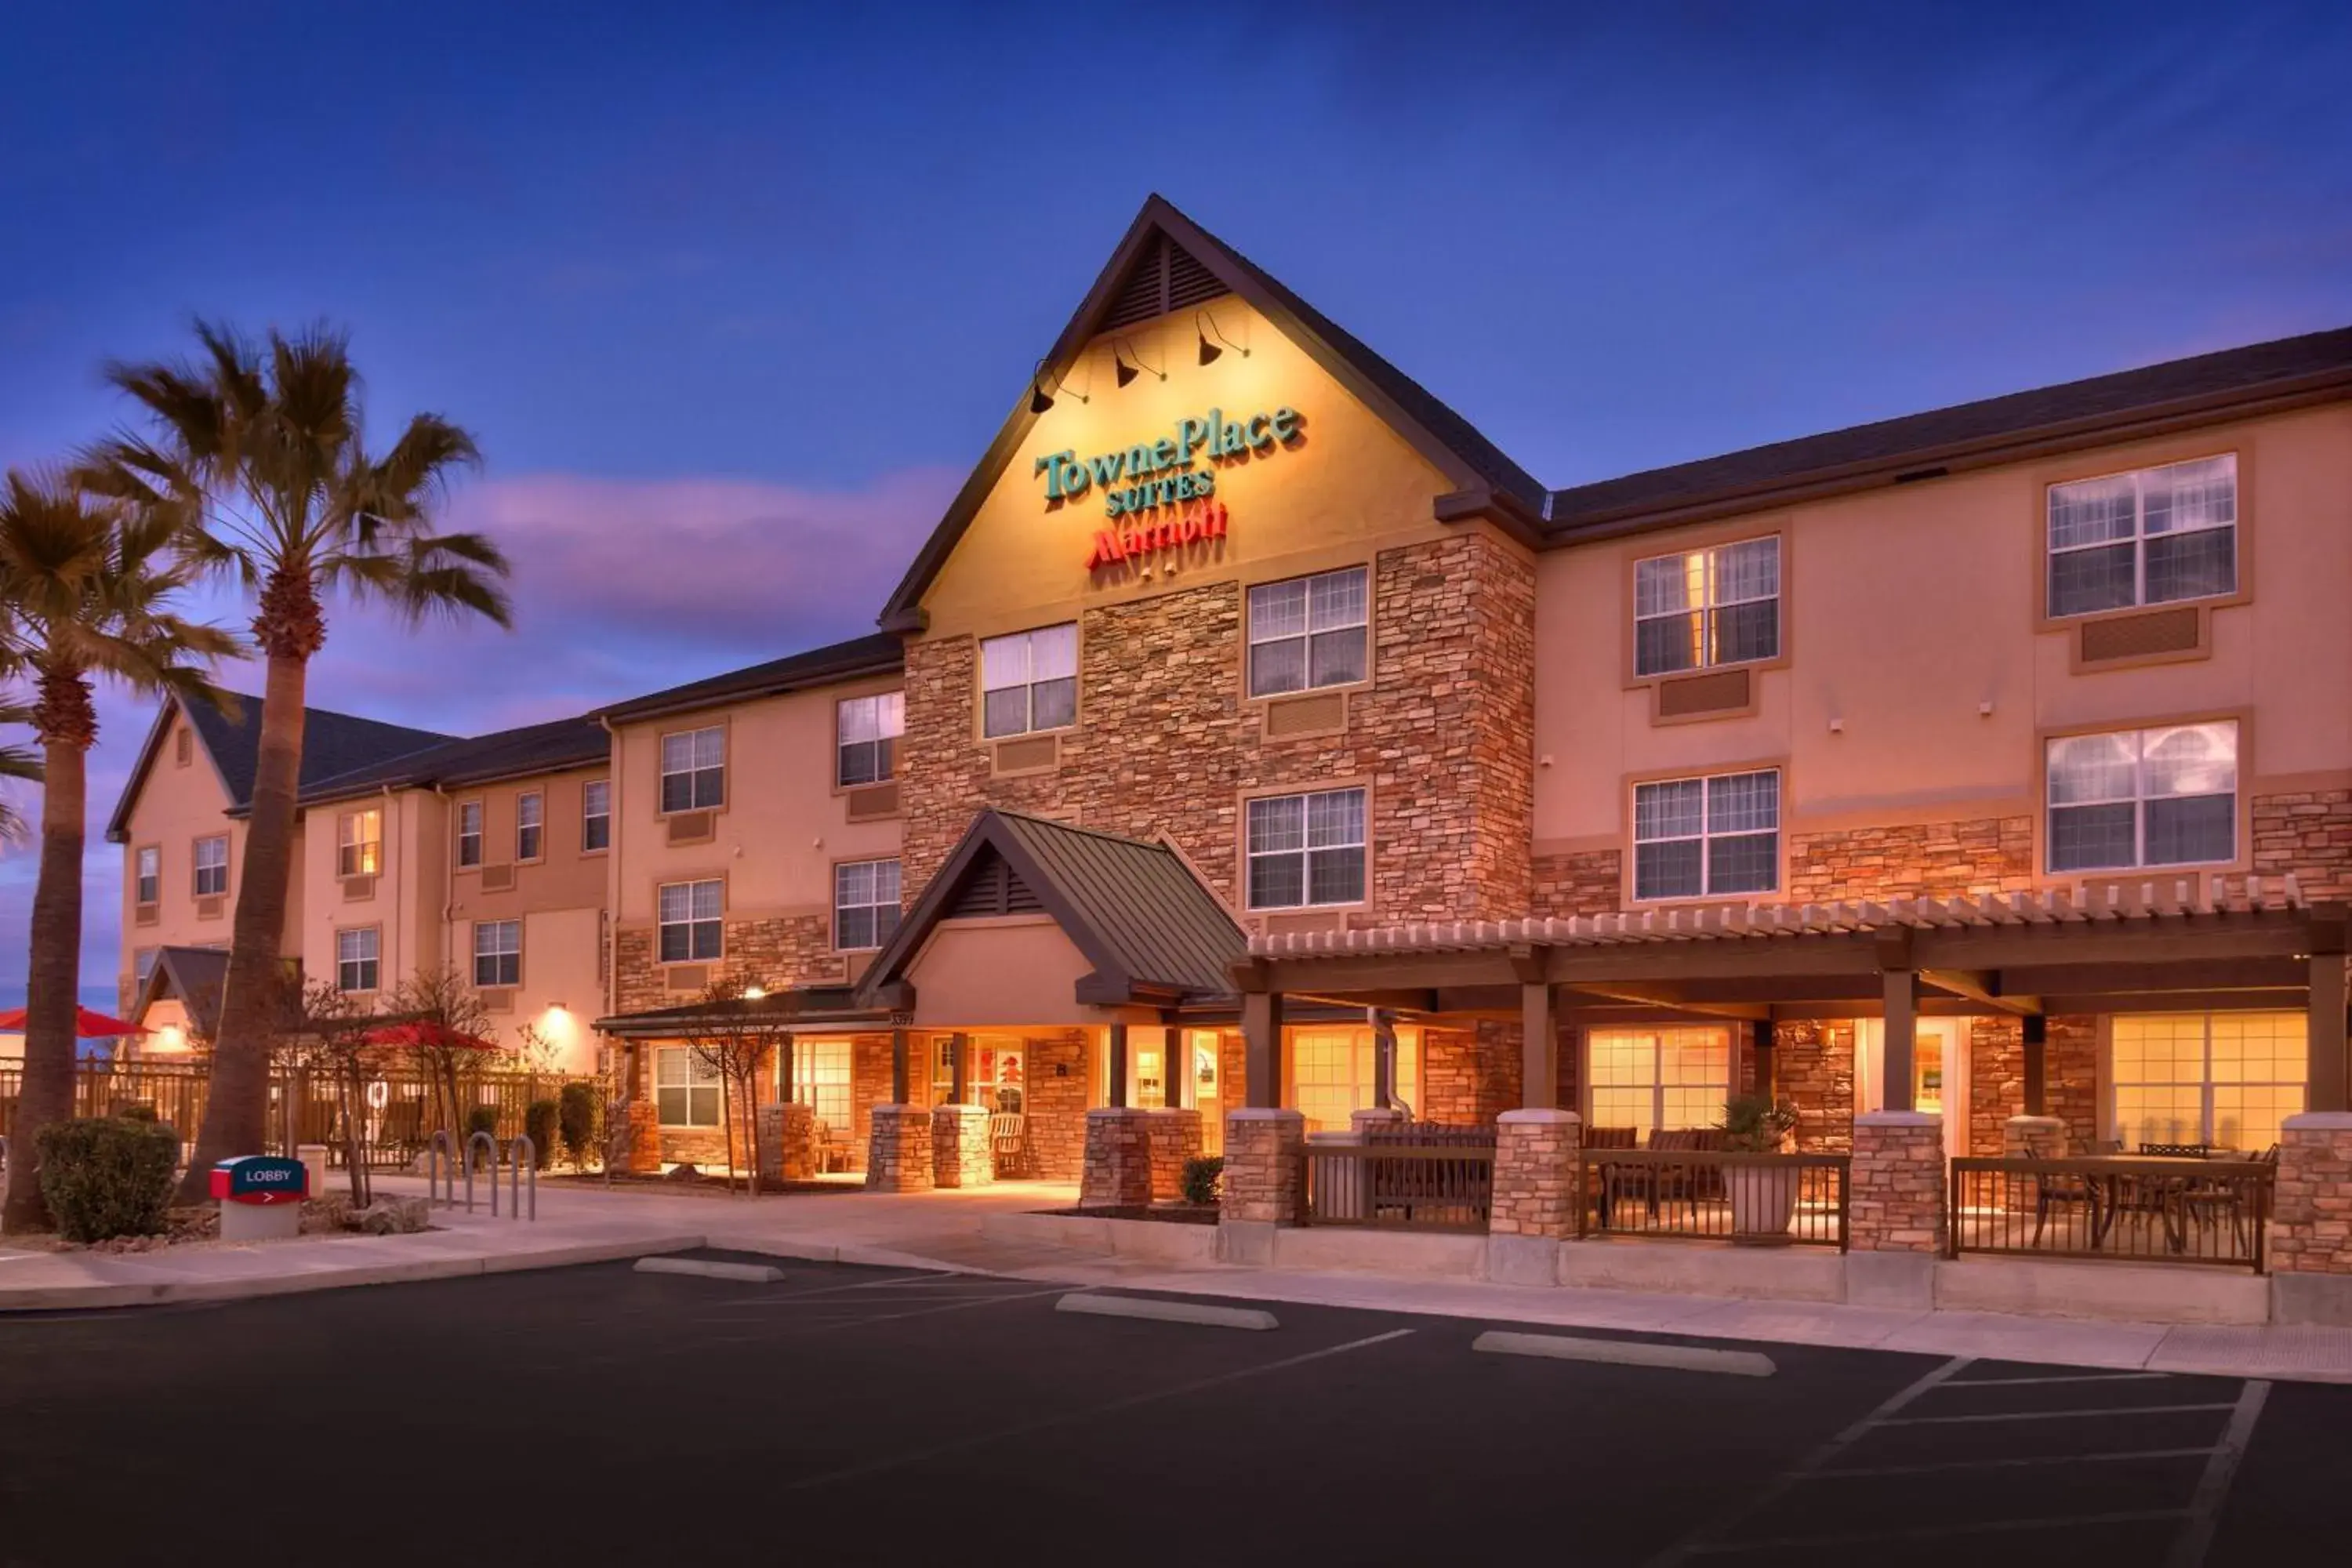 Property Building in TownePlace Suites by Marriott Sierra Vista